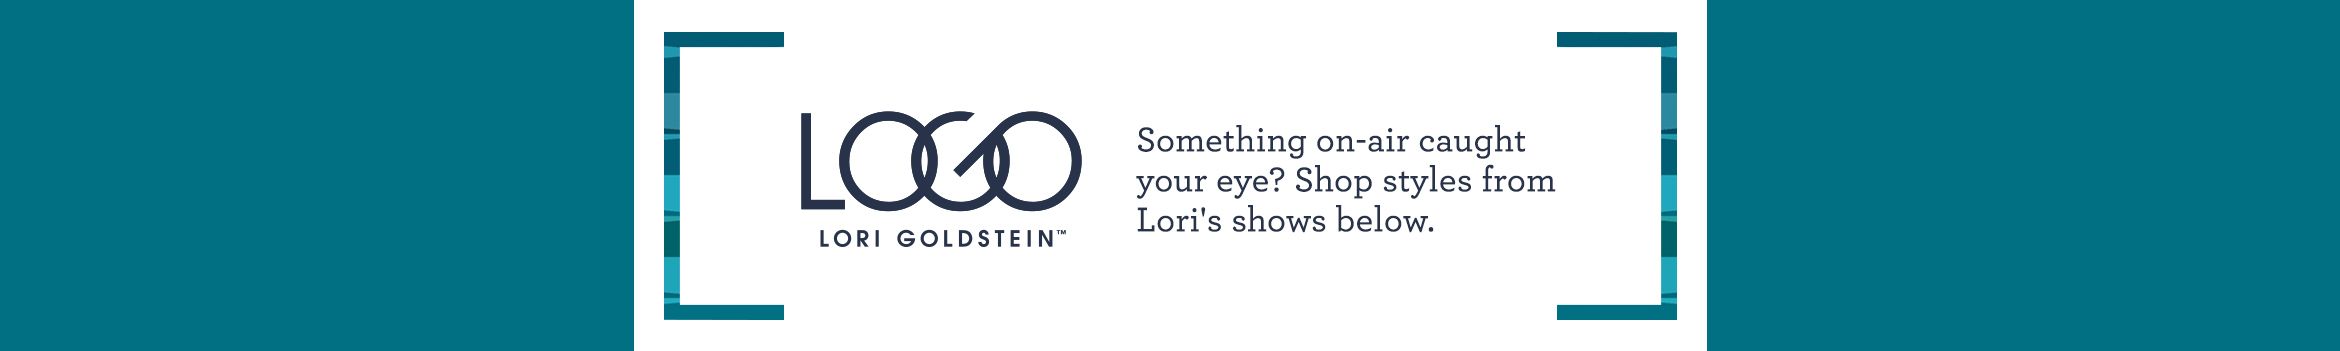 LOGO by Lori Goldstein® Something on-air caught your eye? Shop styles from Lori's shows below.